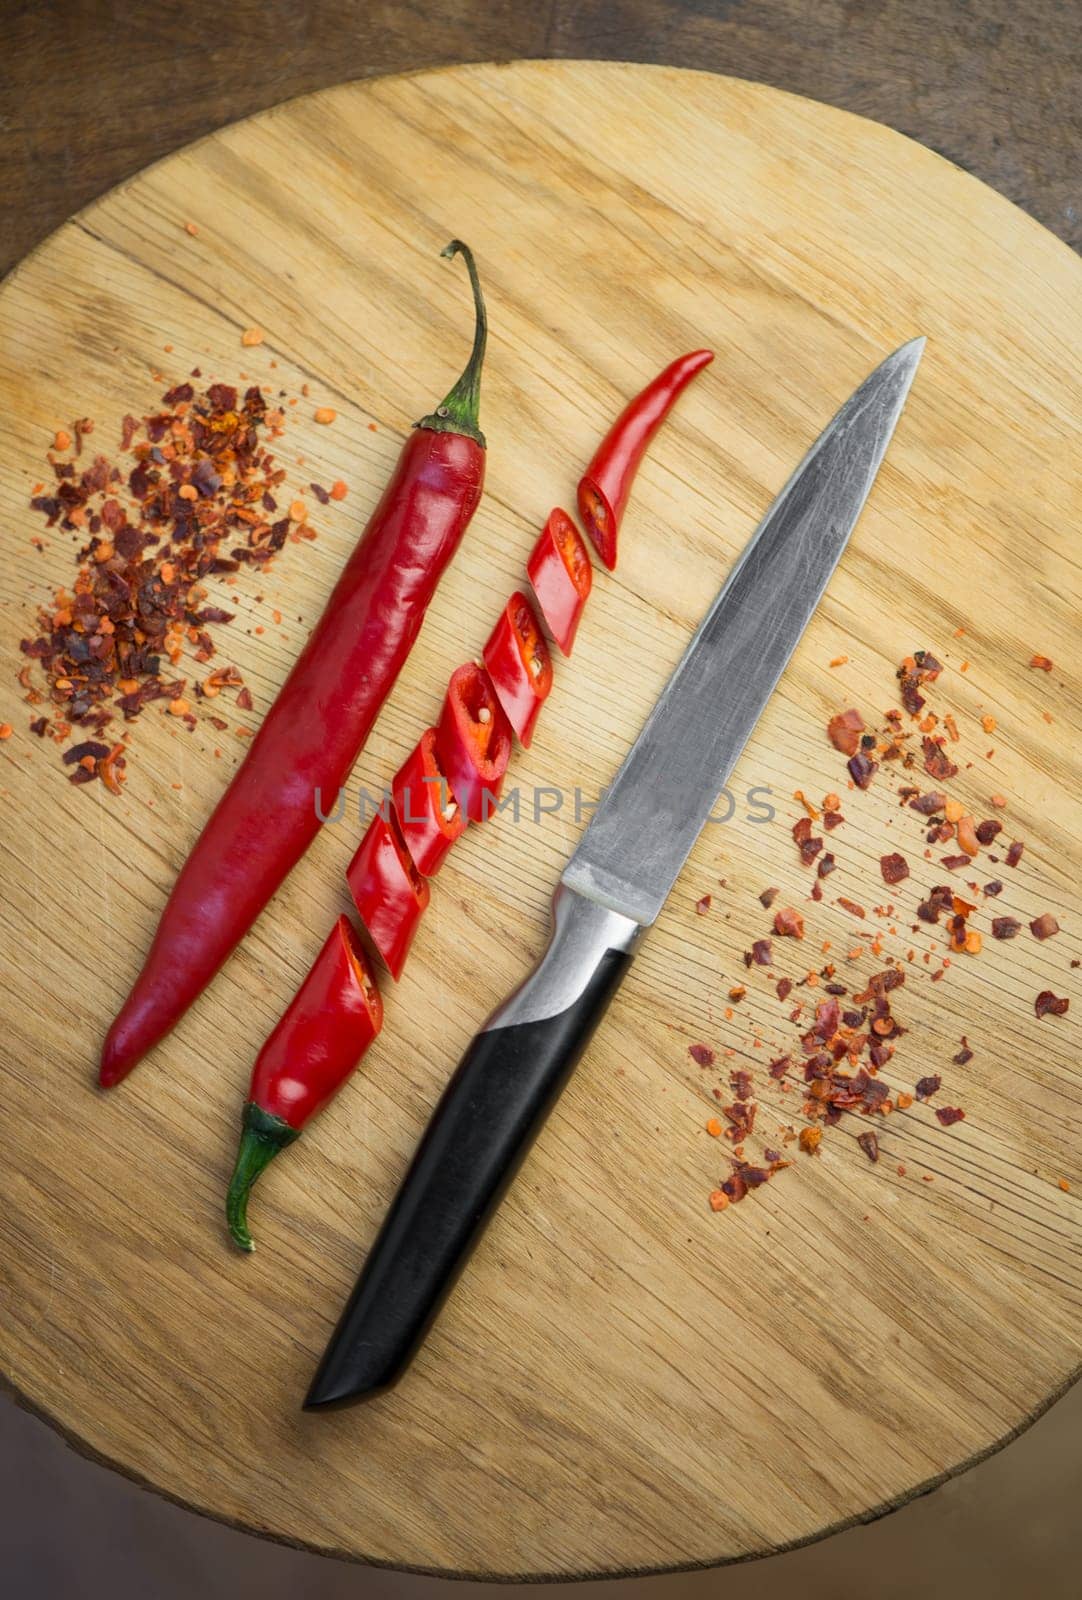 Red chili pepper cut into pieces on a black background. Hot spice, red chili